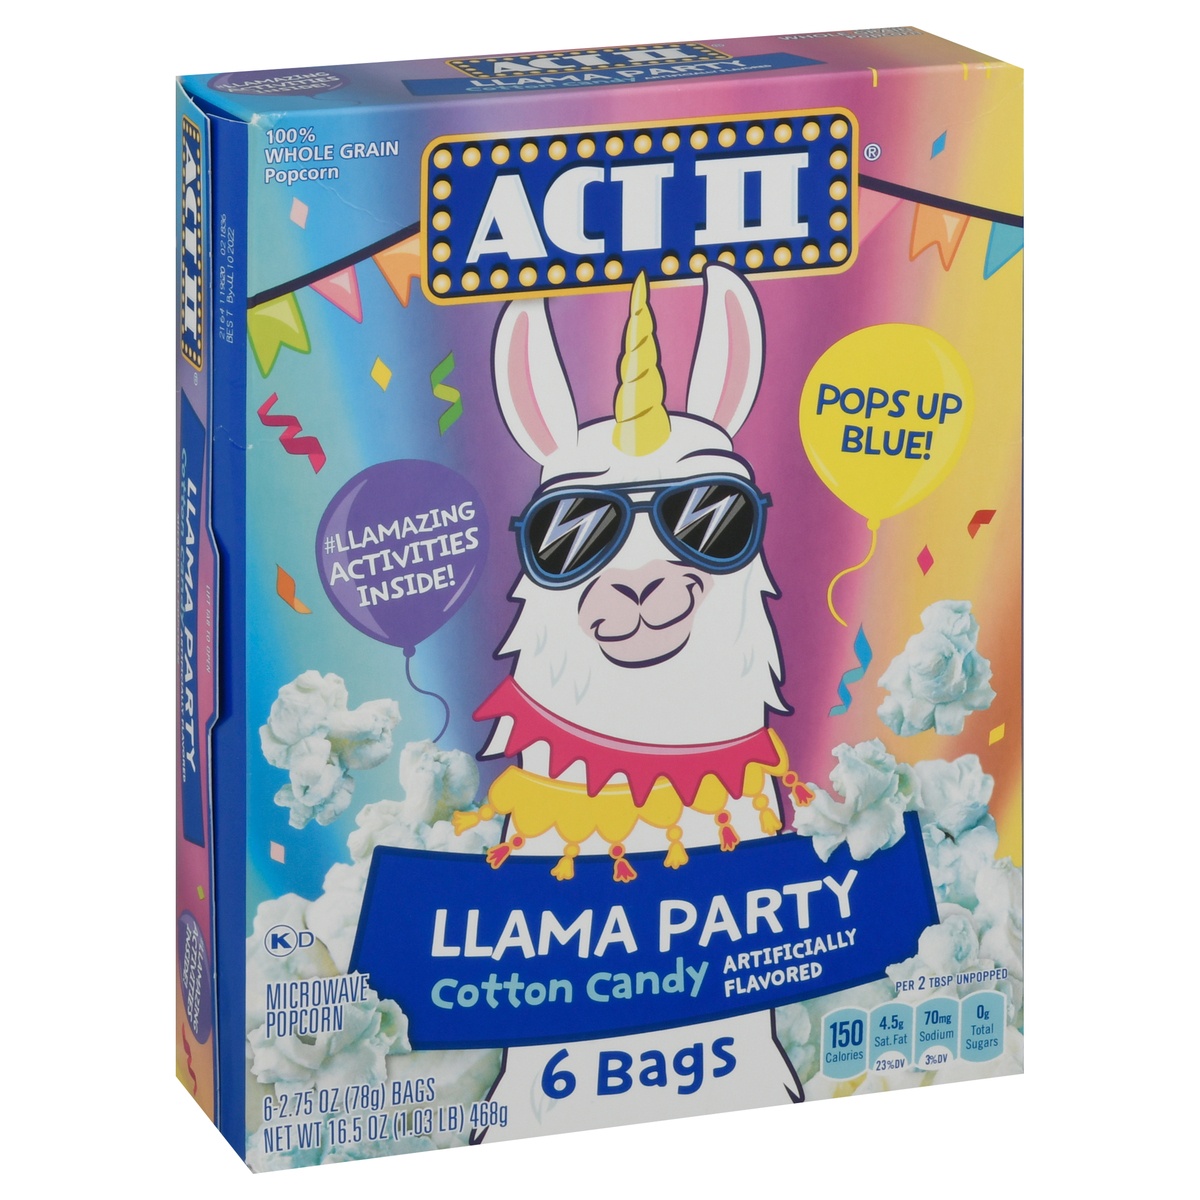 slide 10 of 10, ACT II Llama Party Cotton Candy Flavored Microwave Popcorn Bags, 6 ct; 2.75 oz